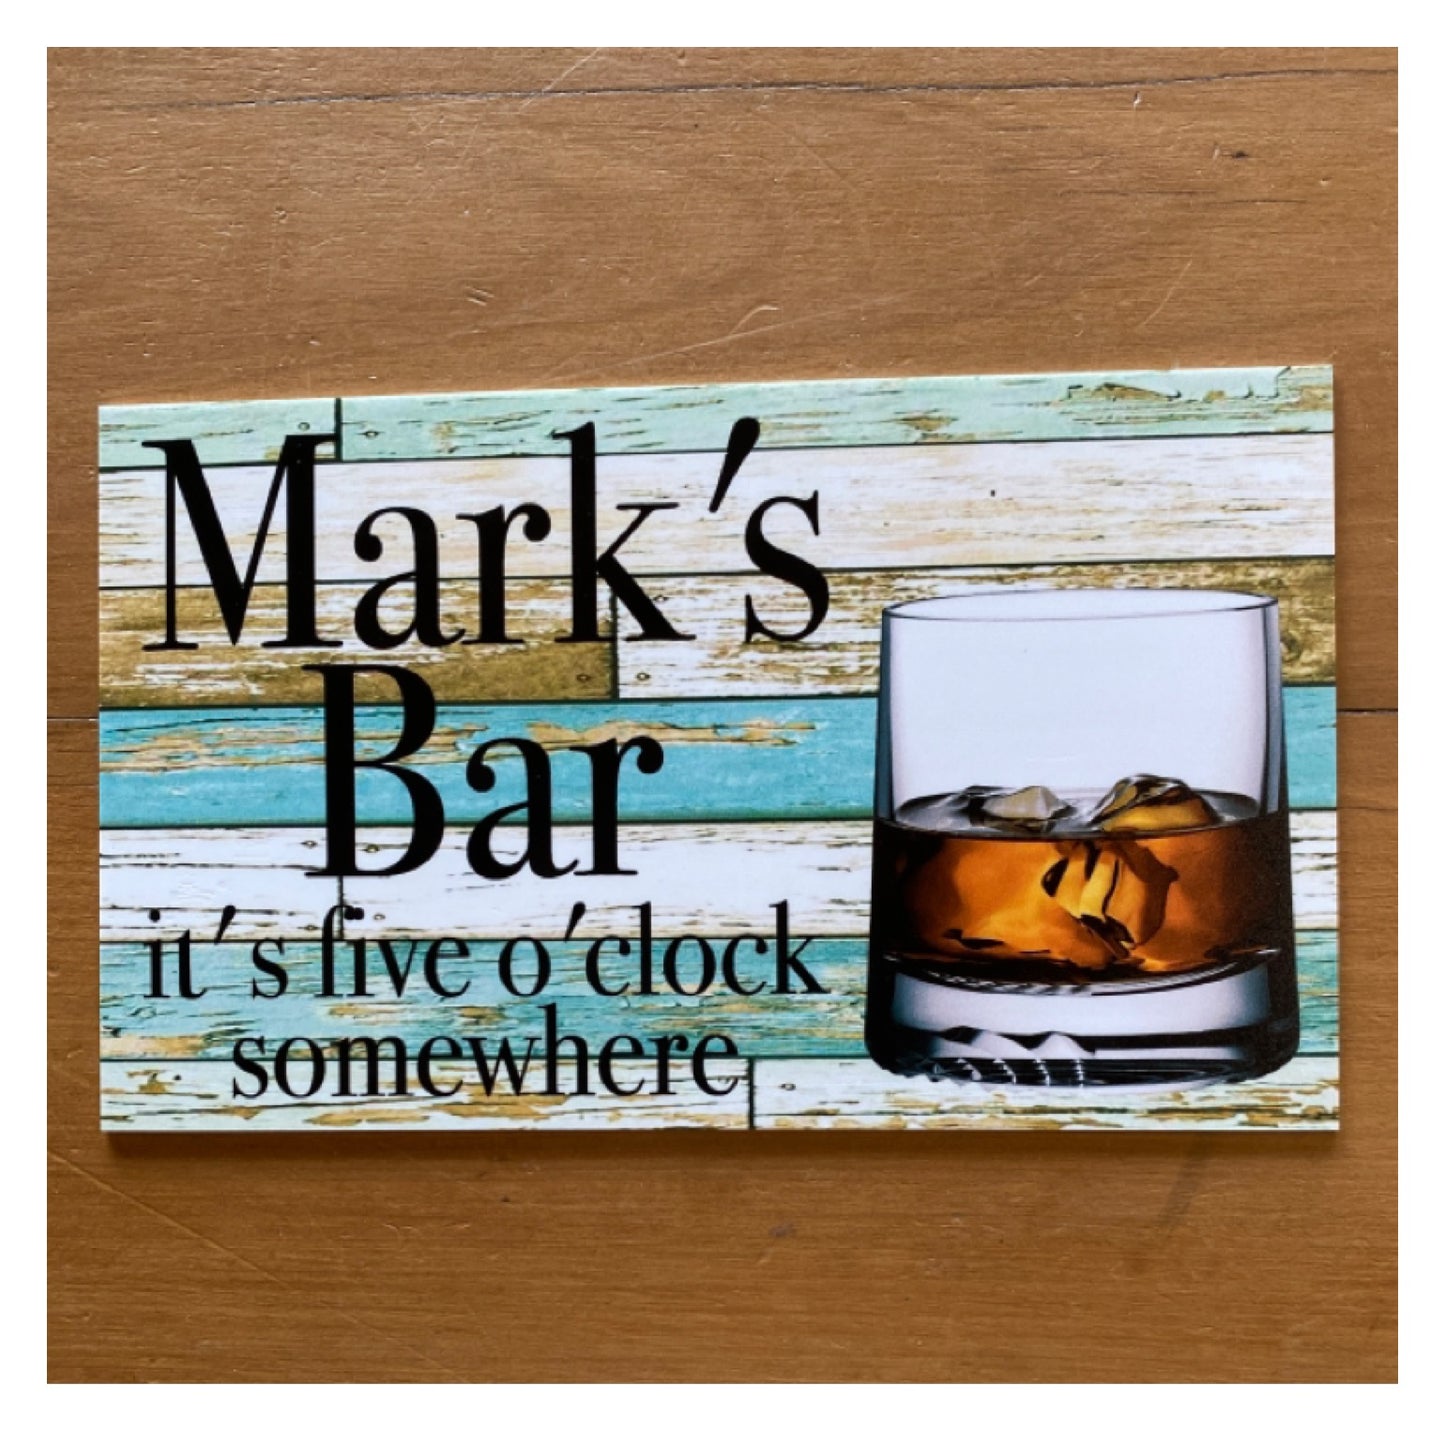 Scotch Bar Rustic Blue Custom Personalised Sign - The Renmy Store Homewares & Gifts 